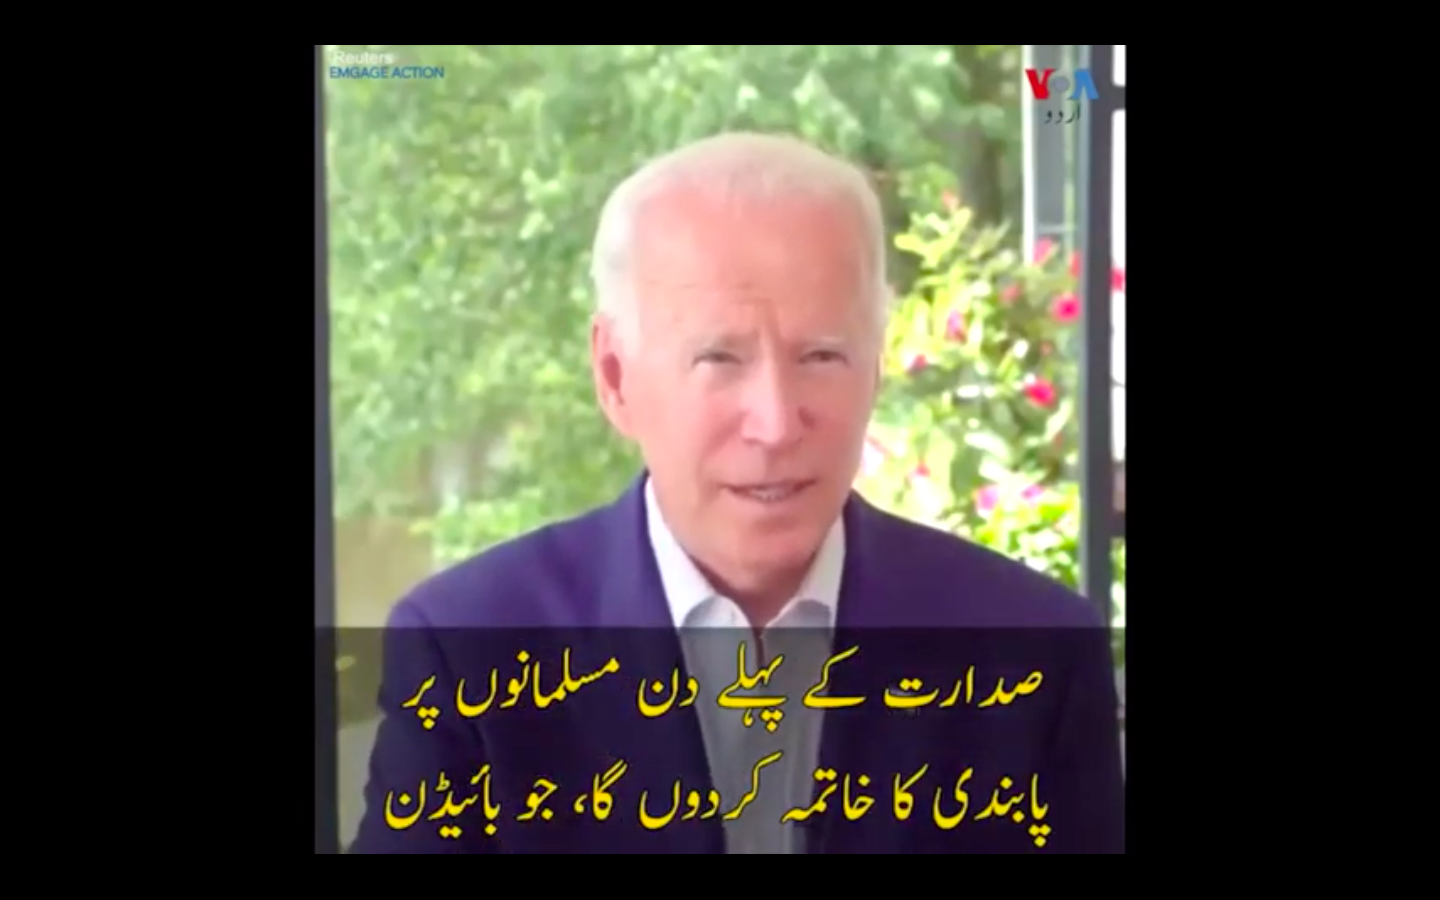 VOA Under Investigation For Election Interference After Promoting Pro-Biden Ad